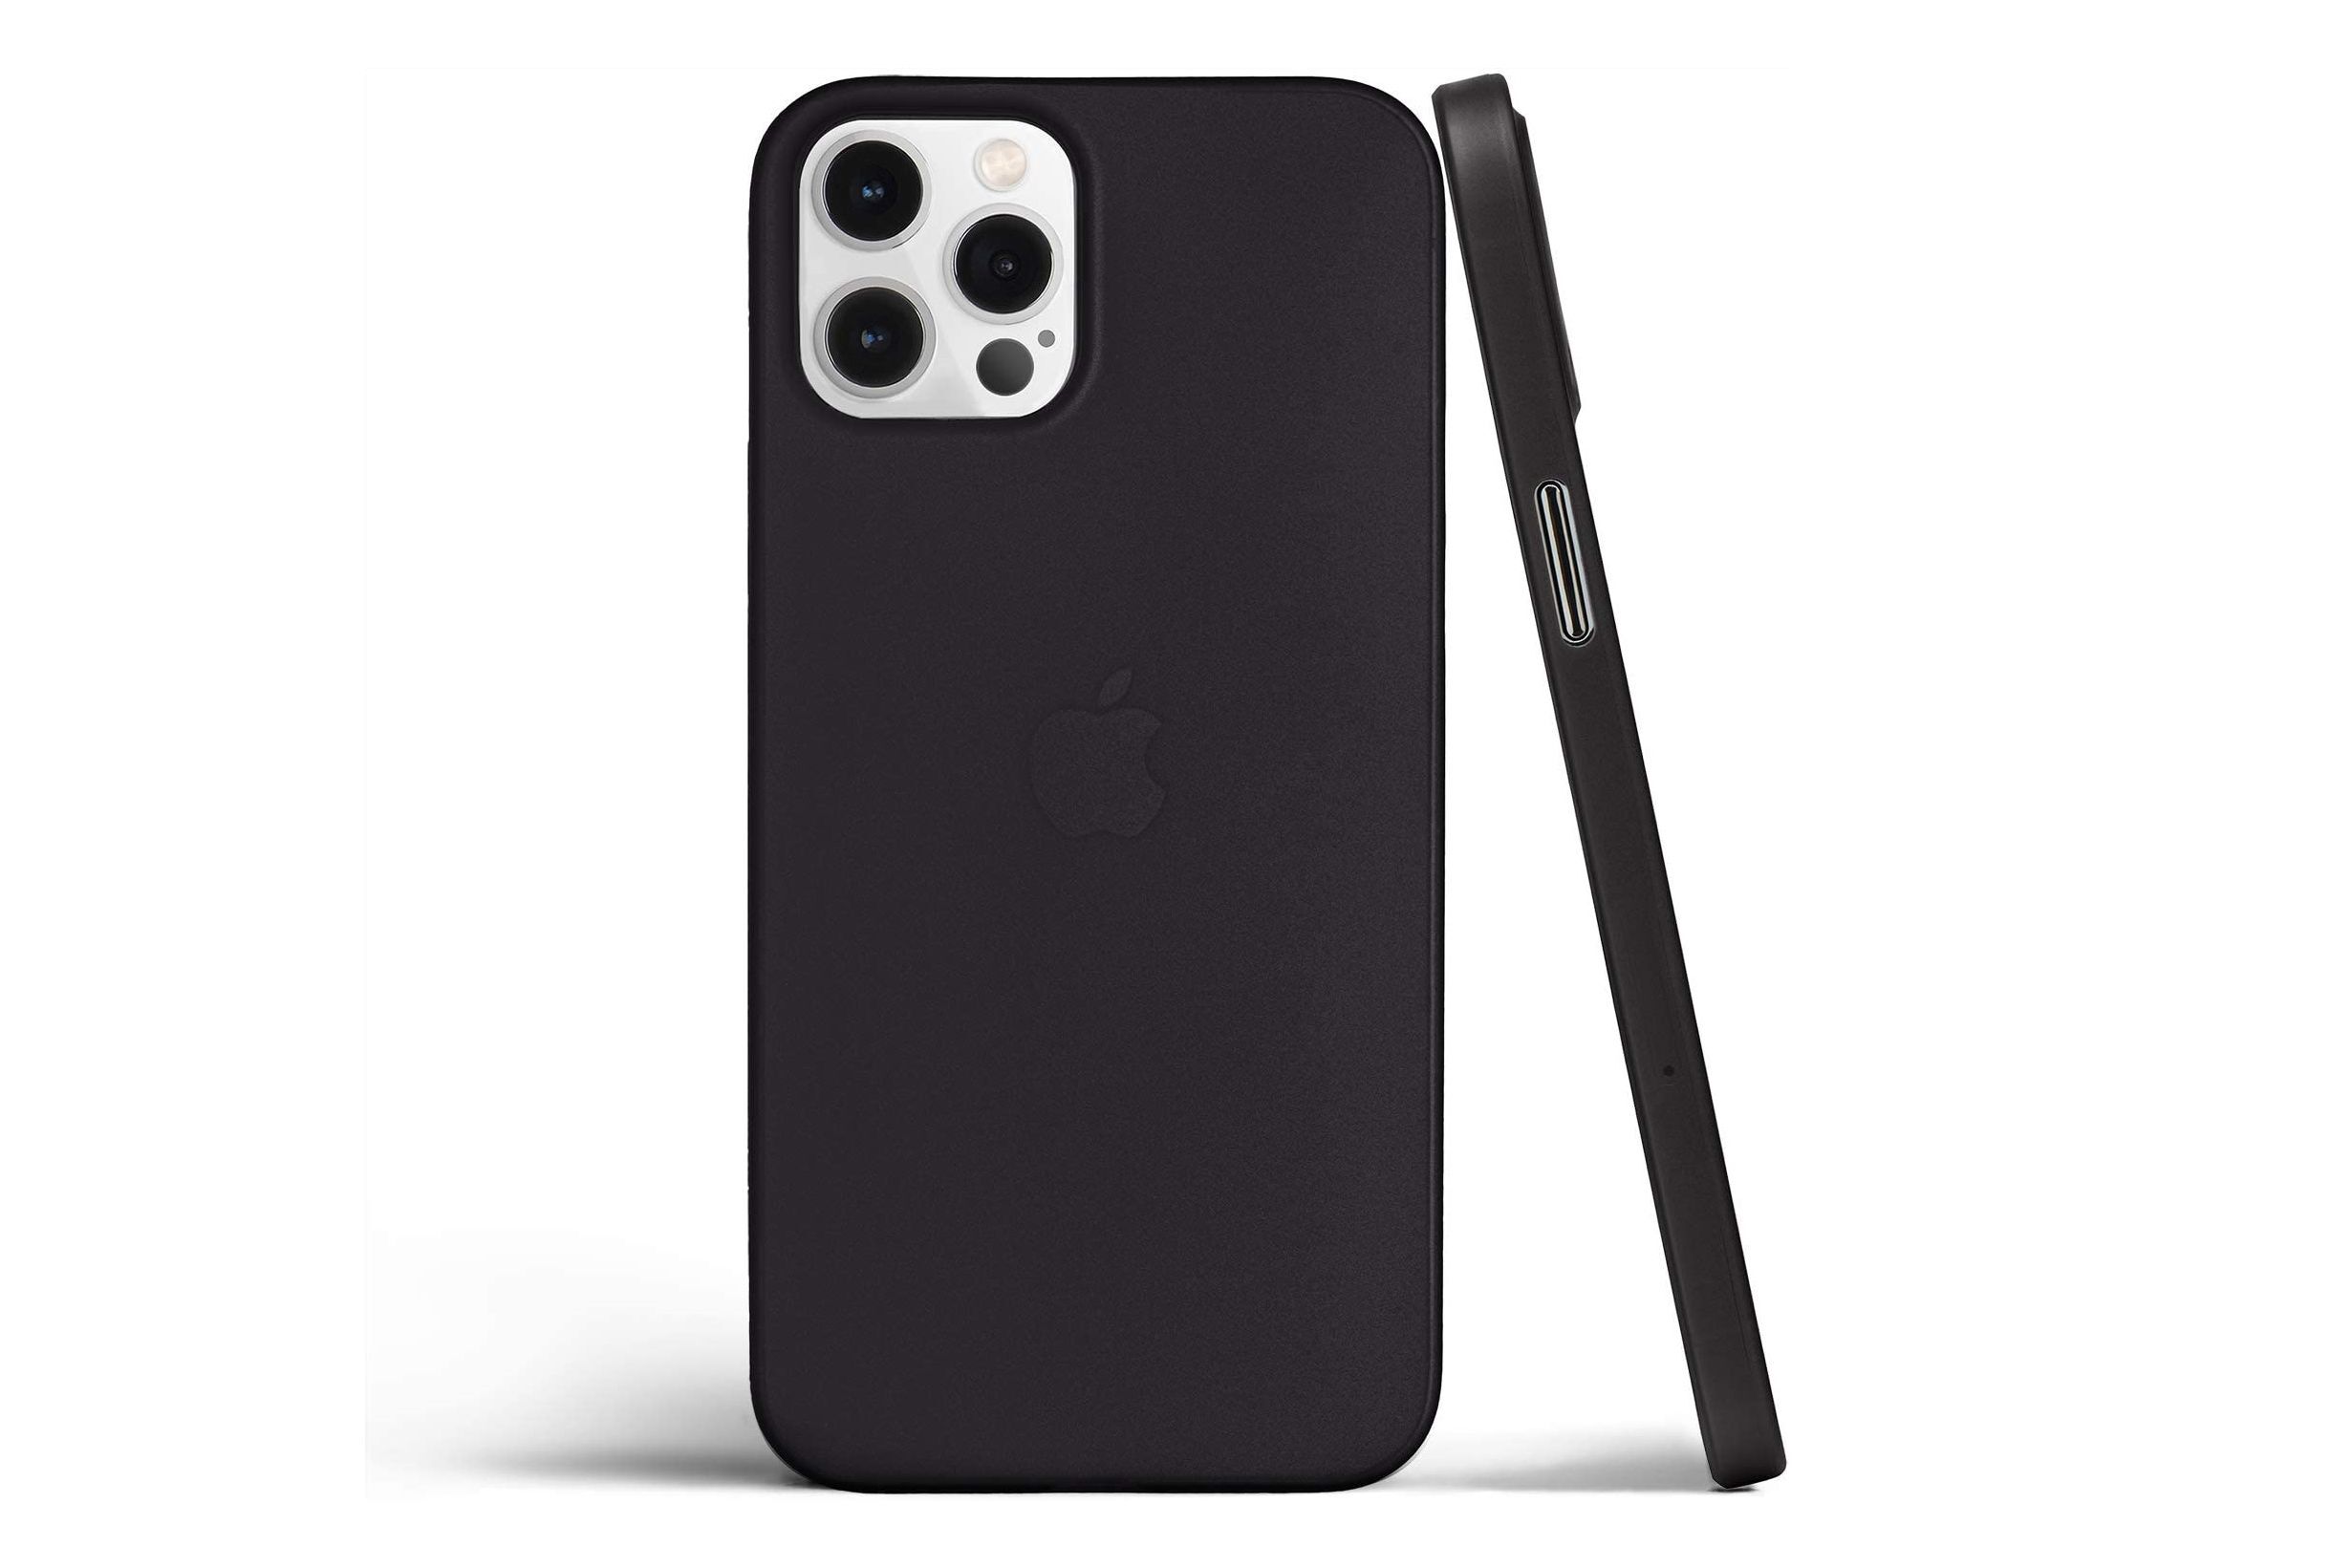 Totallee Super Thin iPhone 12 Pro Max case - The best iPhone 12 Pro Max cases in 2022 - updated October